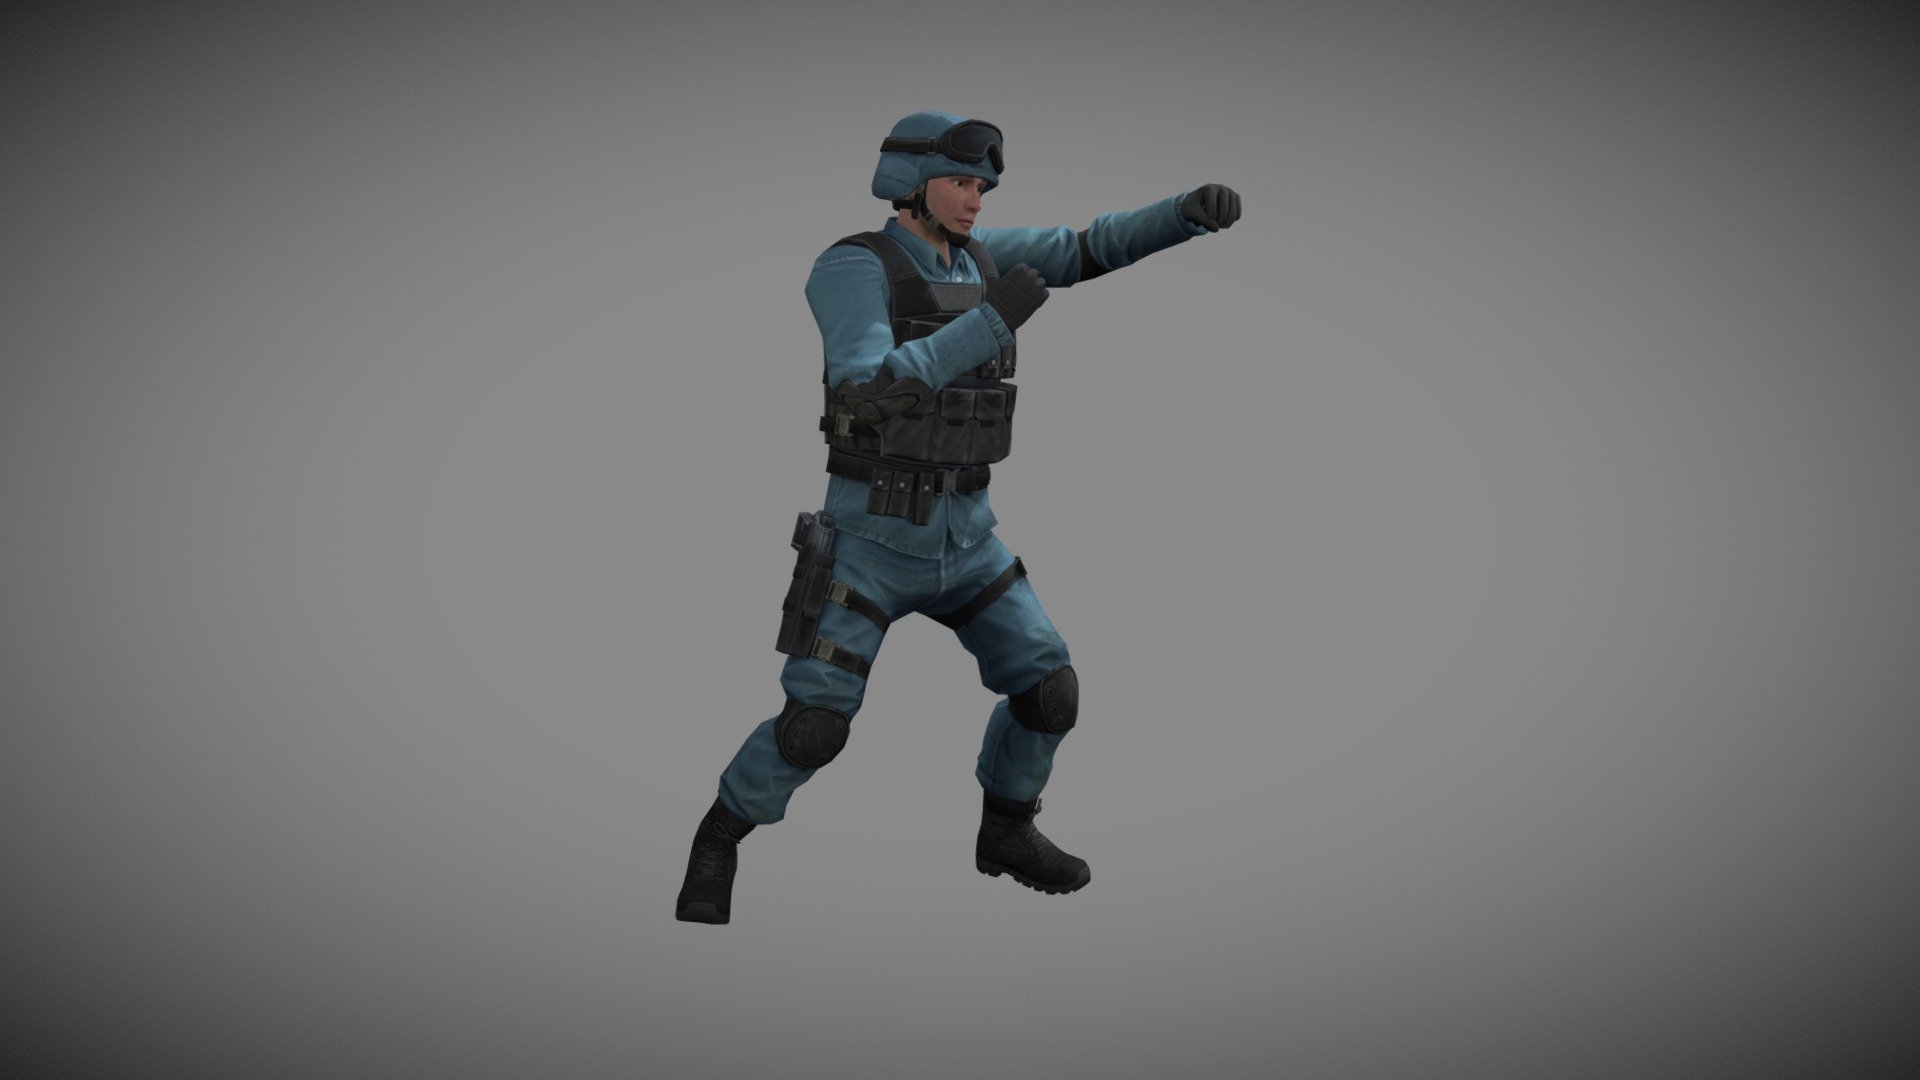 Animated soldier thows punch combiations in this looping animation at 30 frames per second.

See this 3D model in fighting action in the AR Fight Club app for Android, available on Google Play:

https://play.google.com/store/apps/details?id=com.arfightclub.app

Choose your fighting characters, point your phone at the top of a table or desk and watch them battle! Move around the fighters and view from any angle. Hear the spatial sound effects of battle. Join the AR Fight Club today! - Soldier Throws Quad Punch - Fight Club - 3D model by LasquetiSpice 3d model